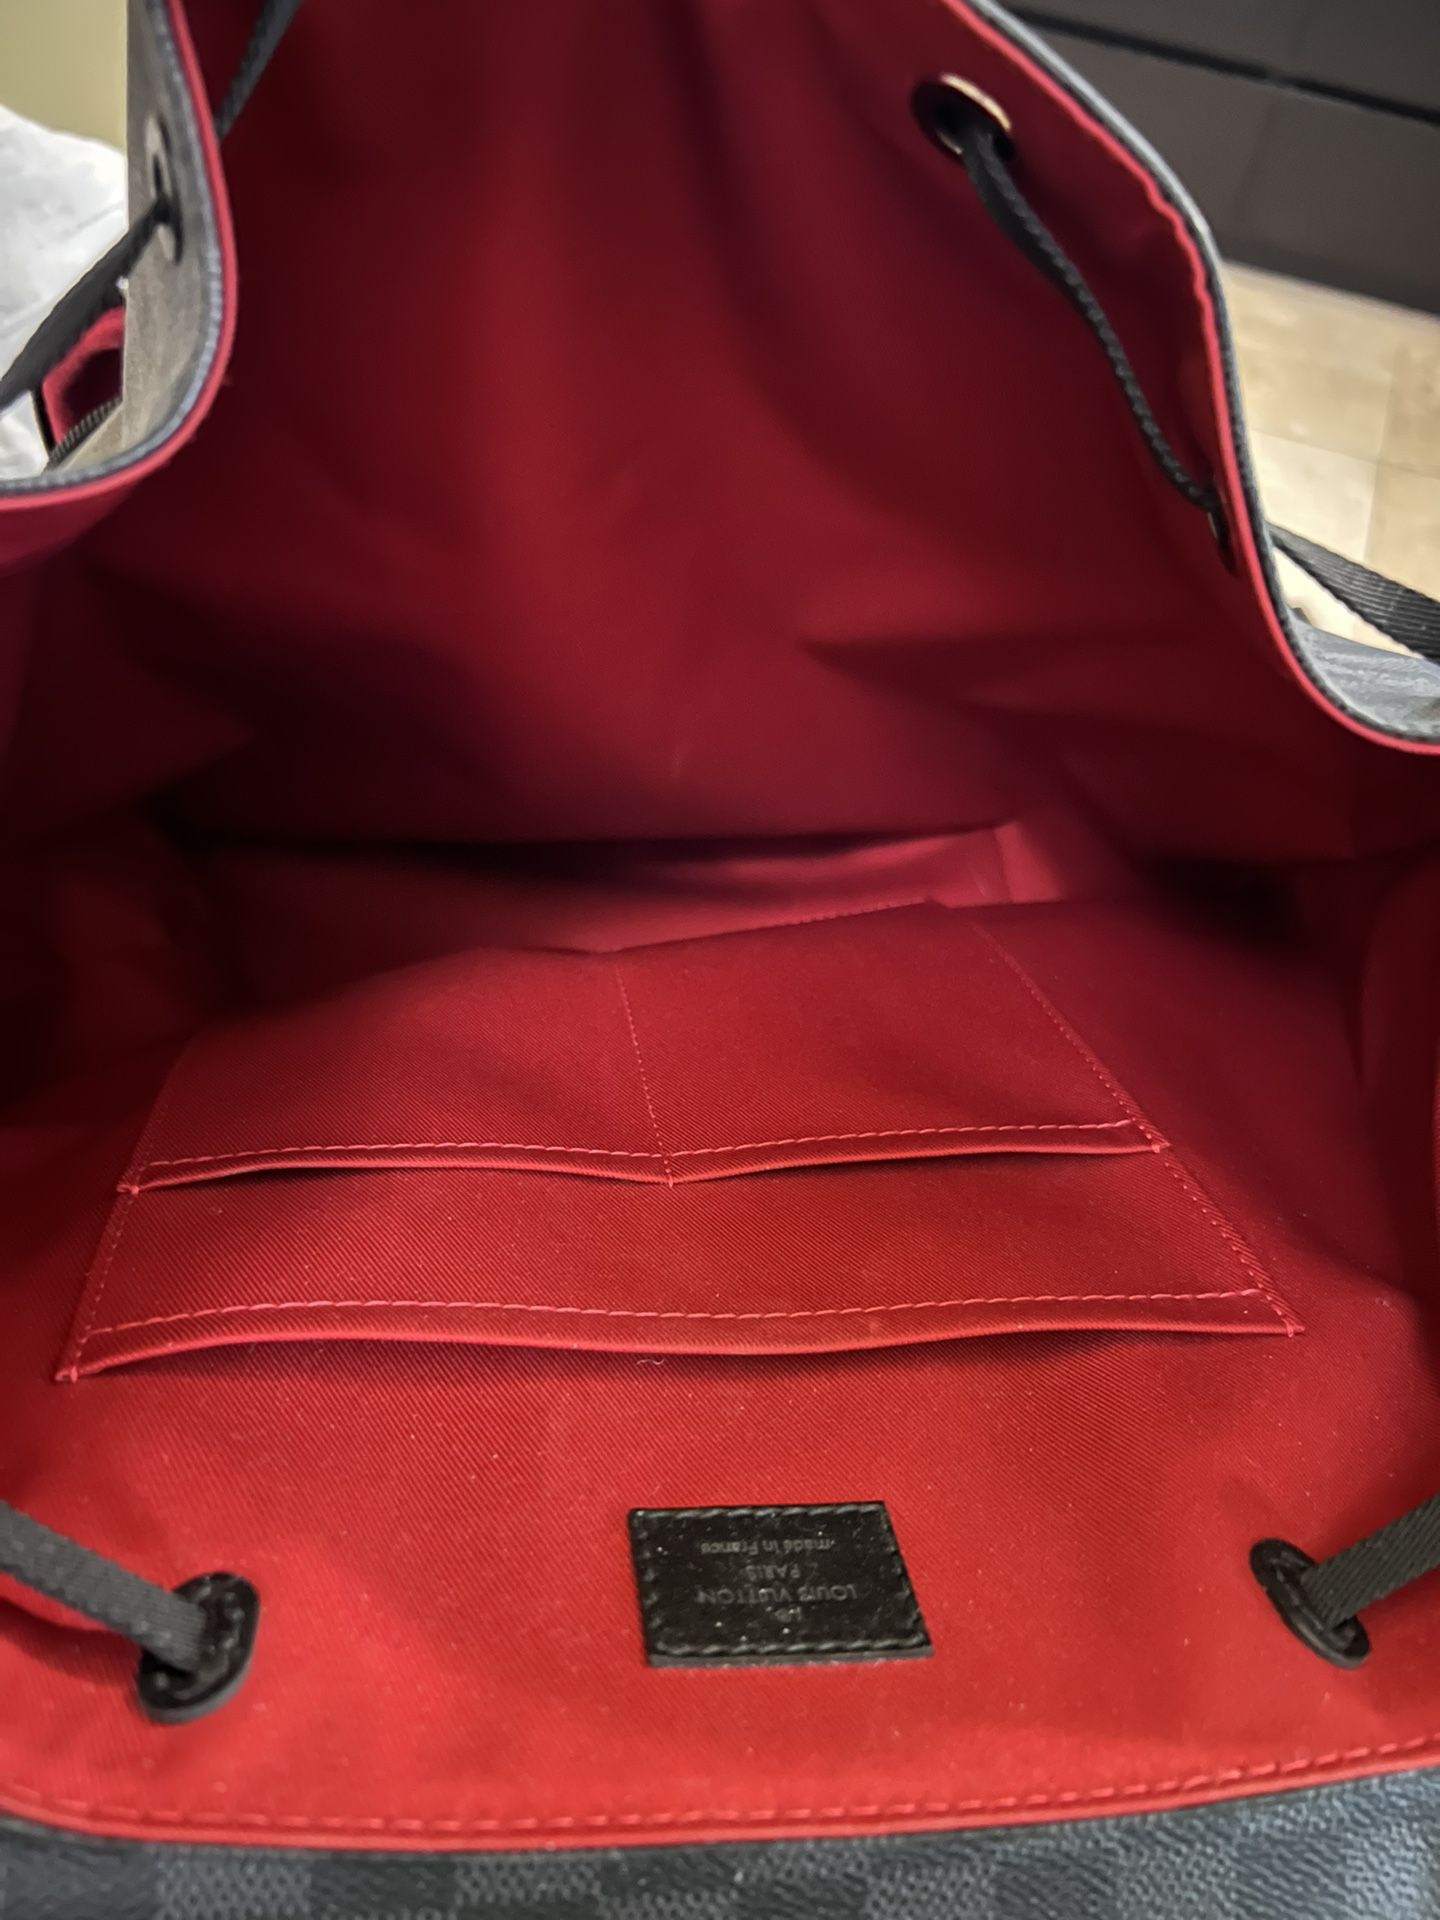 LV Campus Backpack for Sale in San Jose, CA - OfferUp